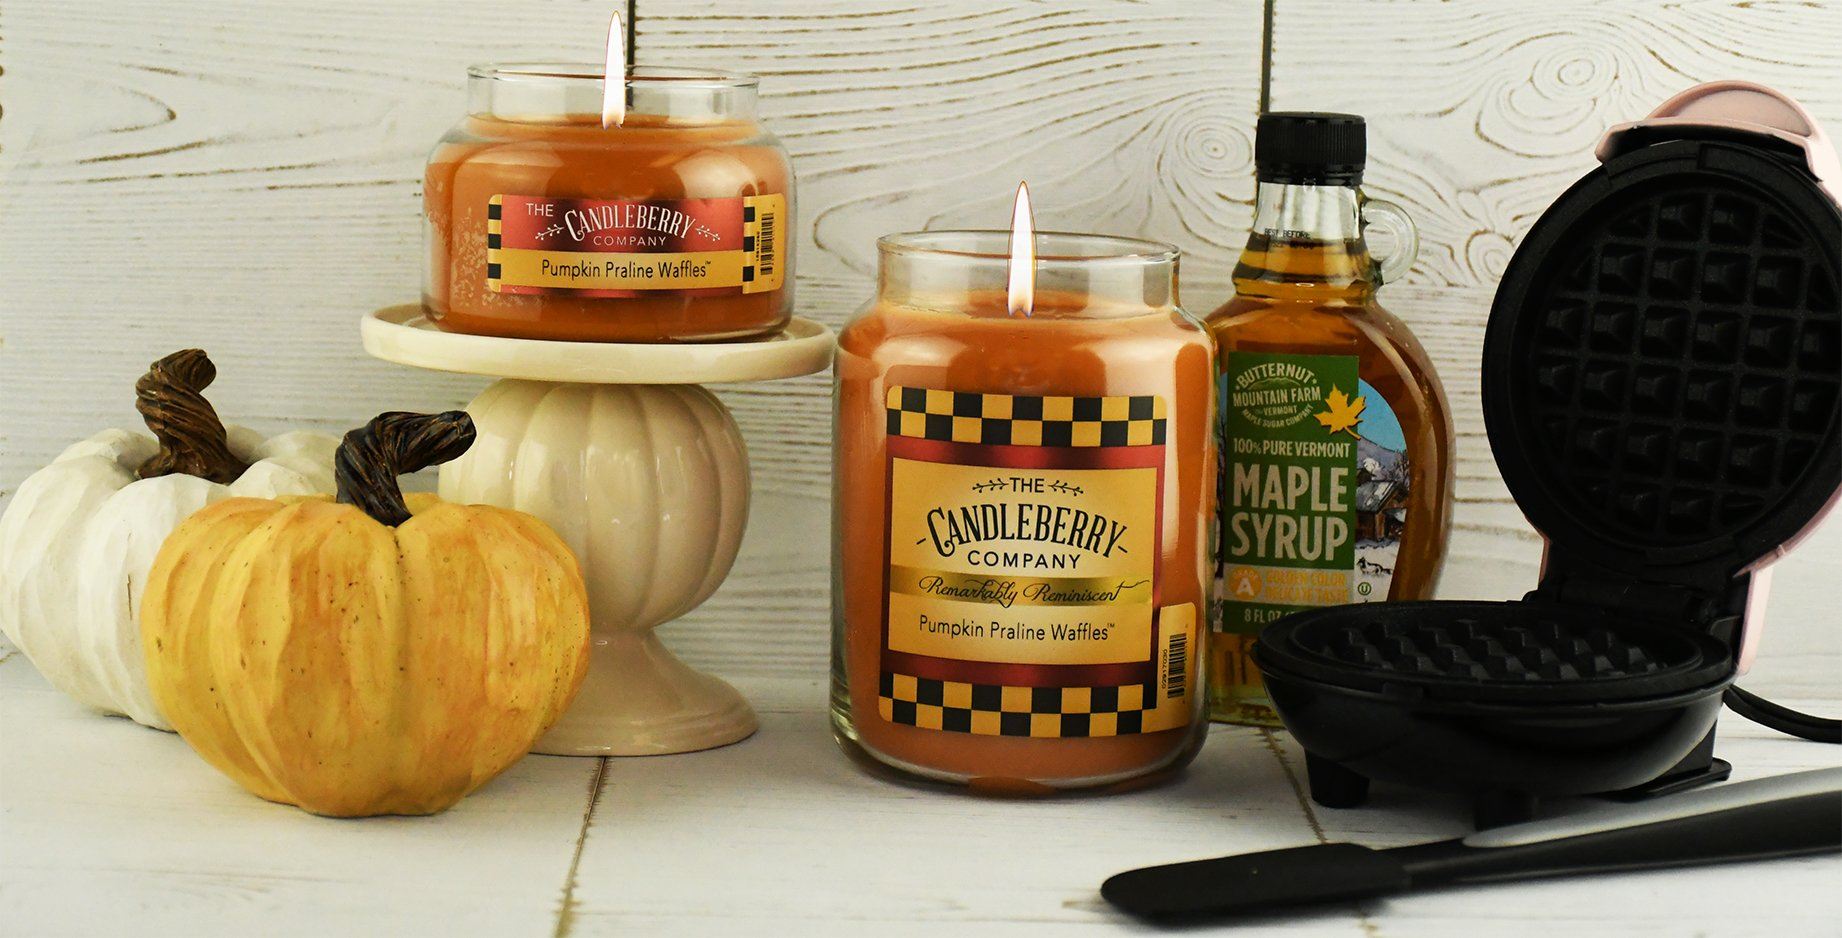 Pumpkin Praline Waffles™, 26 oz. Jar, Scented Candle 26 oz. Large Jar Candle The Candleberry Candle Company 